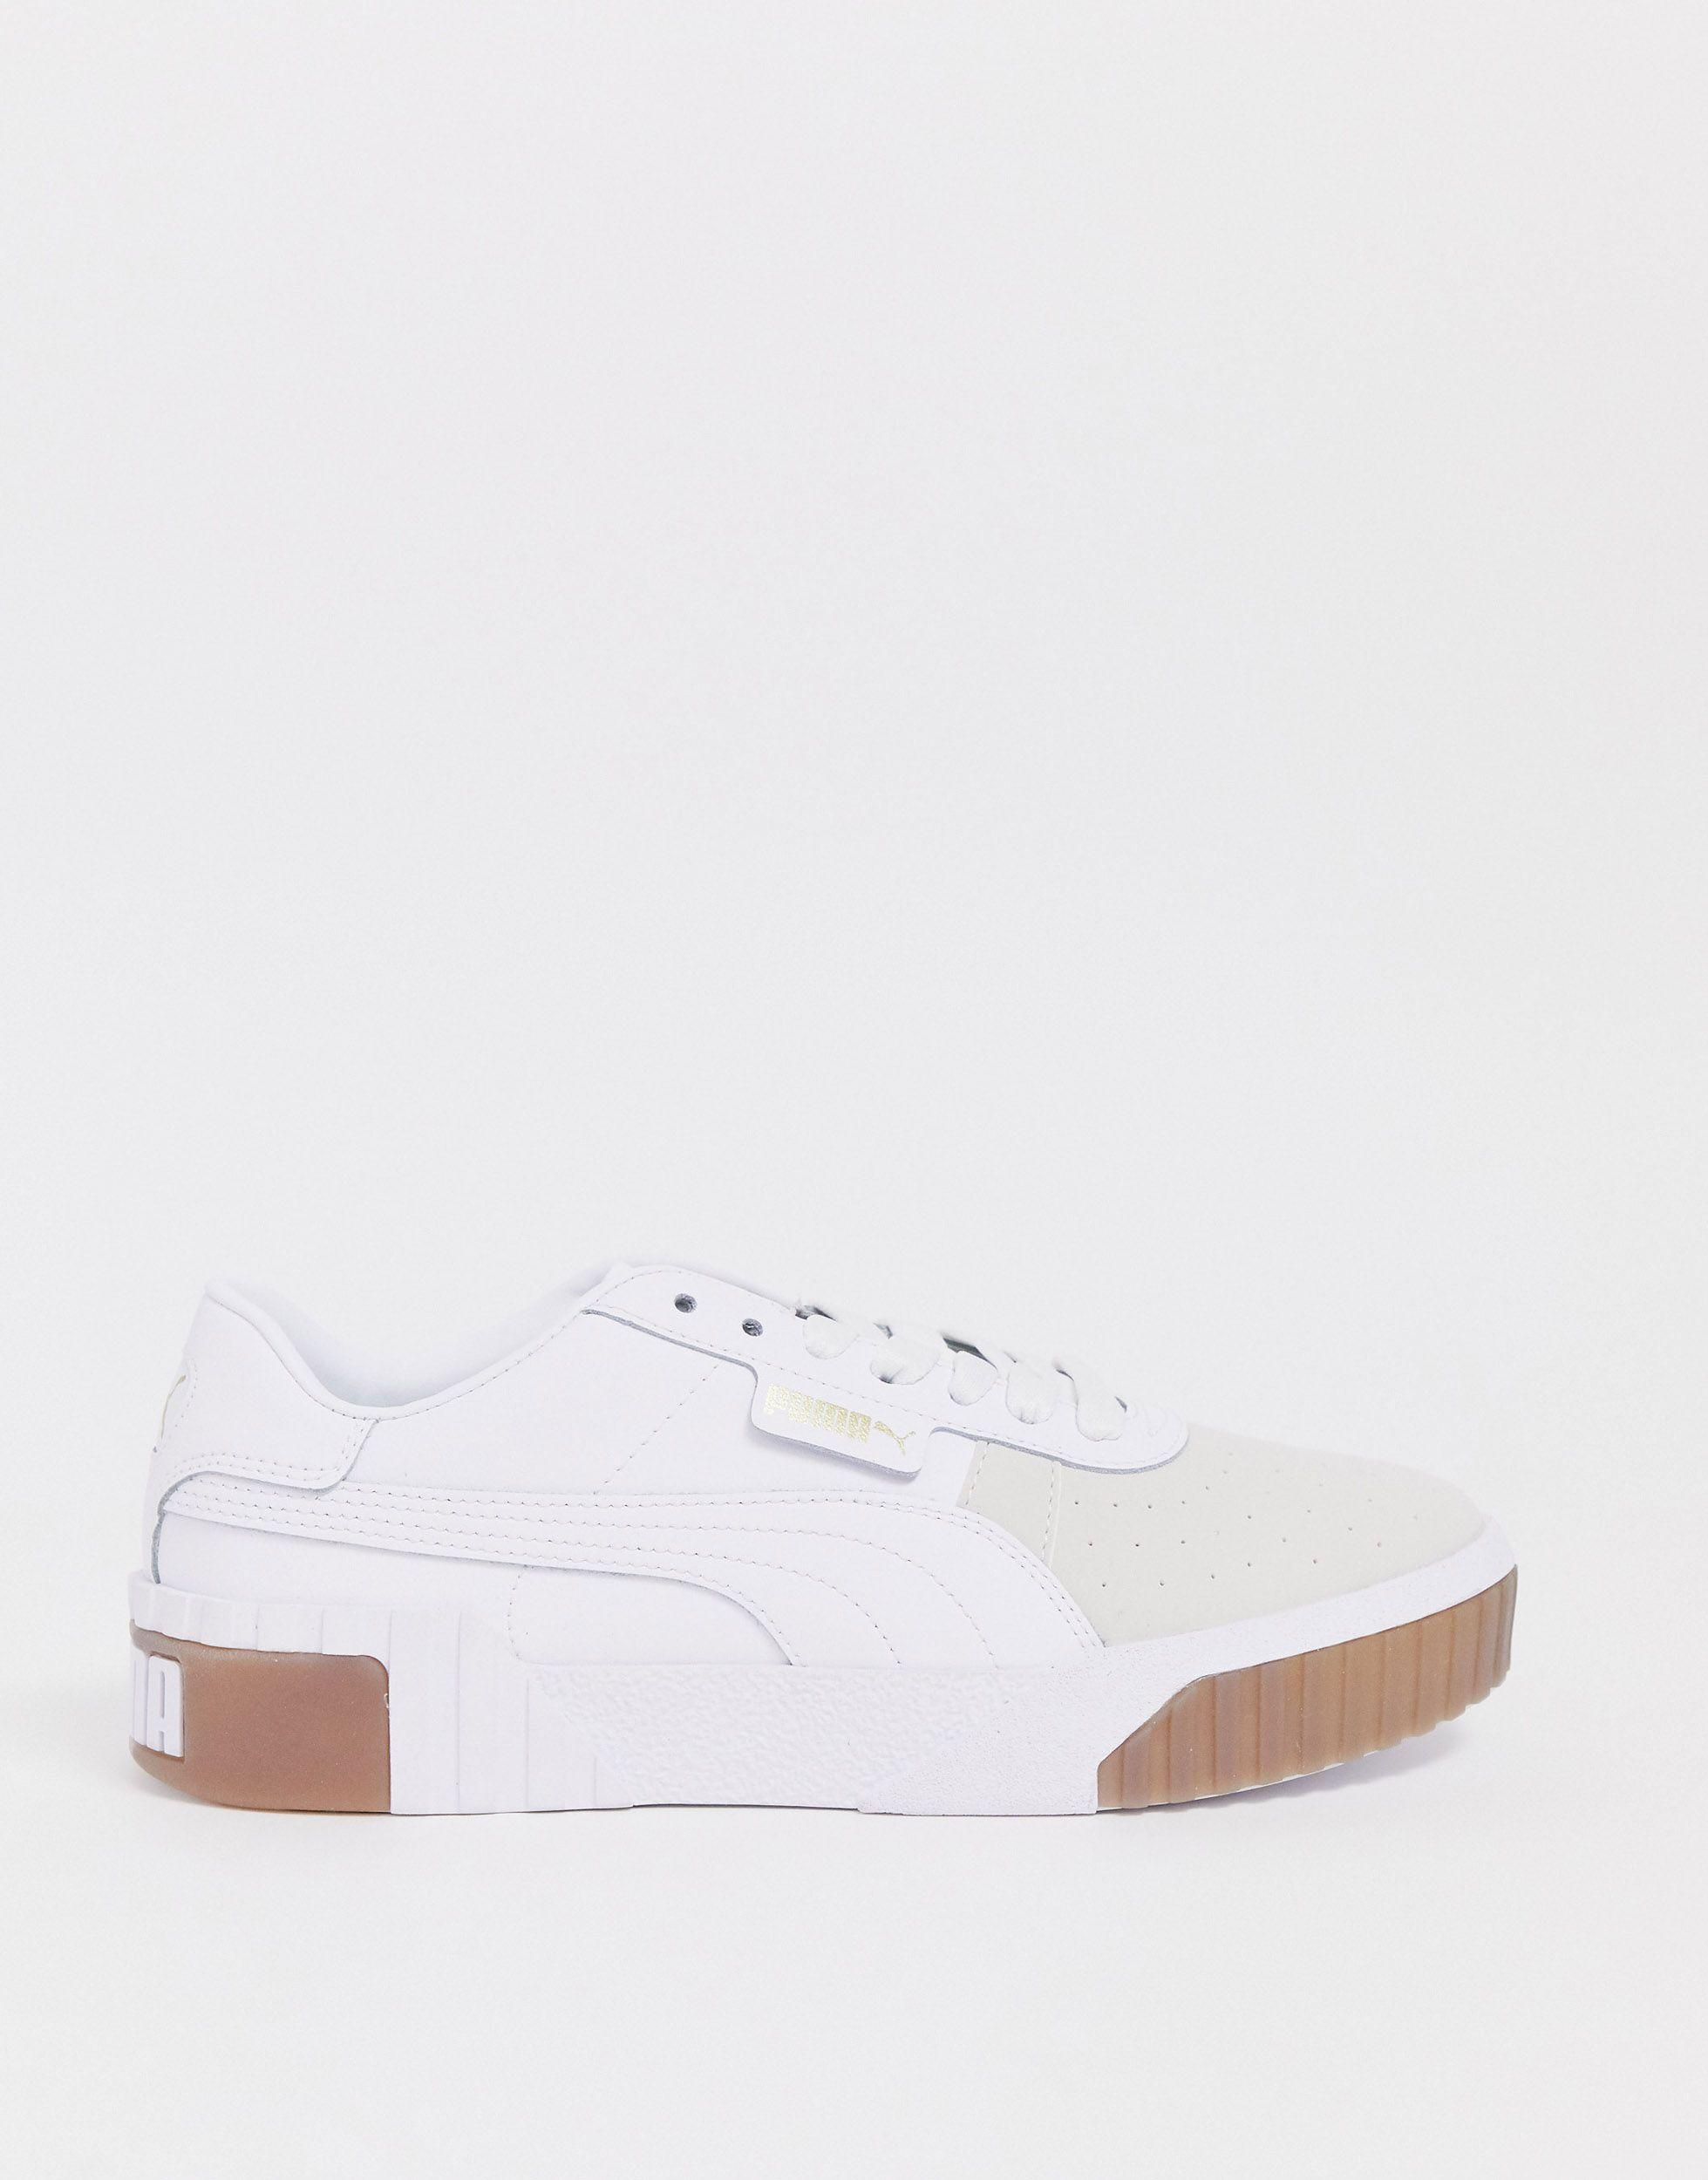 Puma Rubber Exotic Cali Trainers With Gum Sole In White Lyst